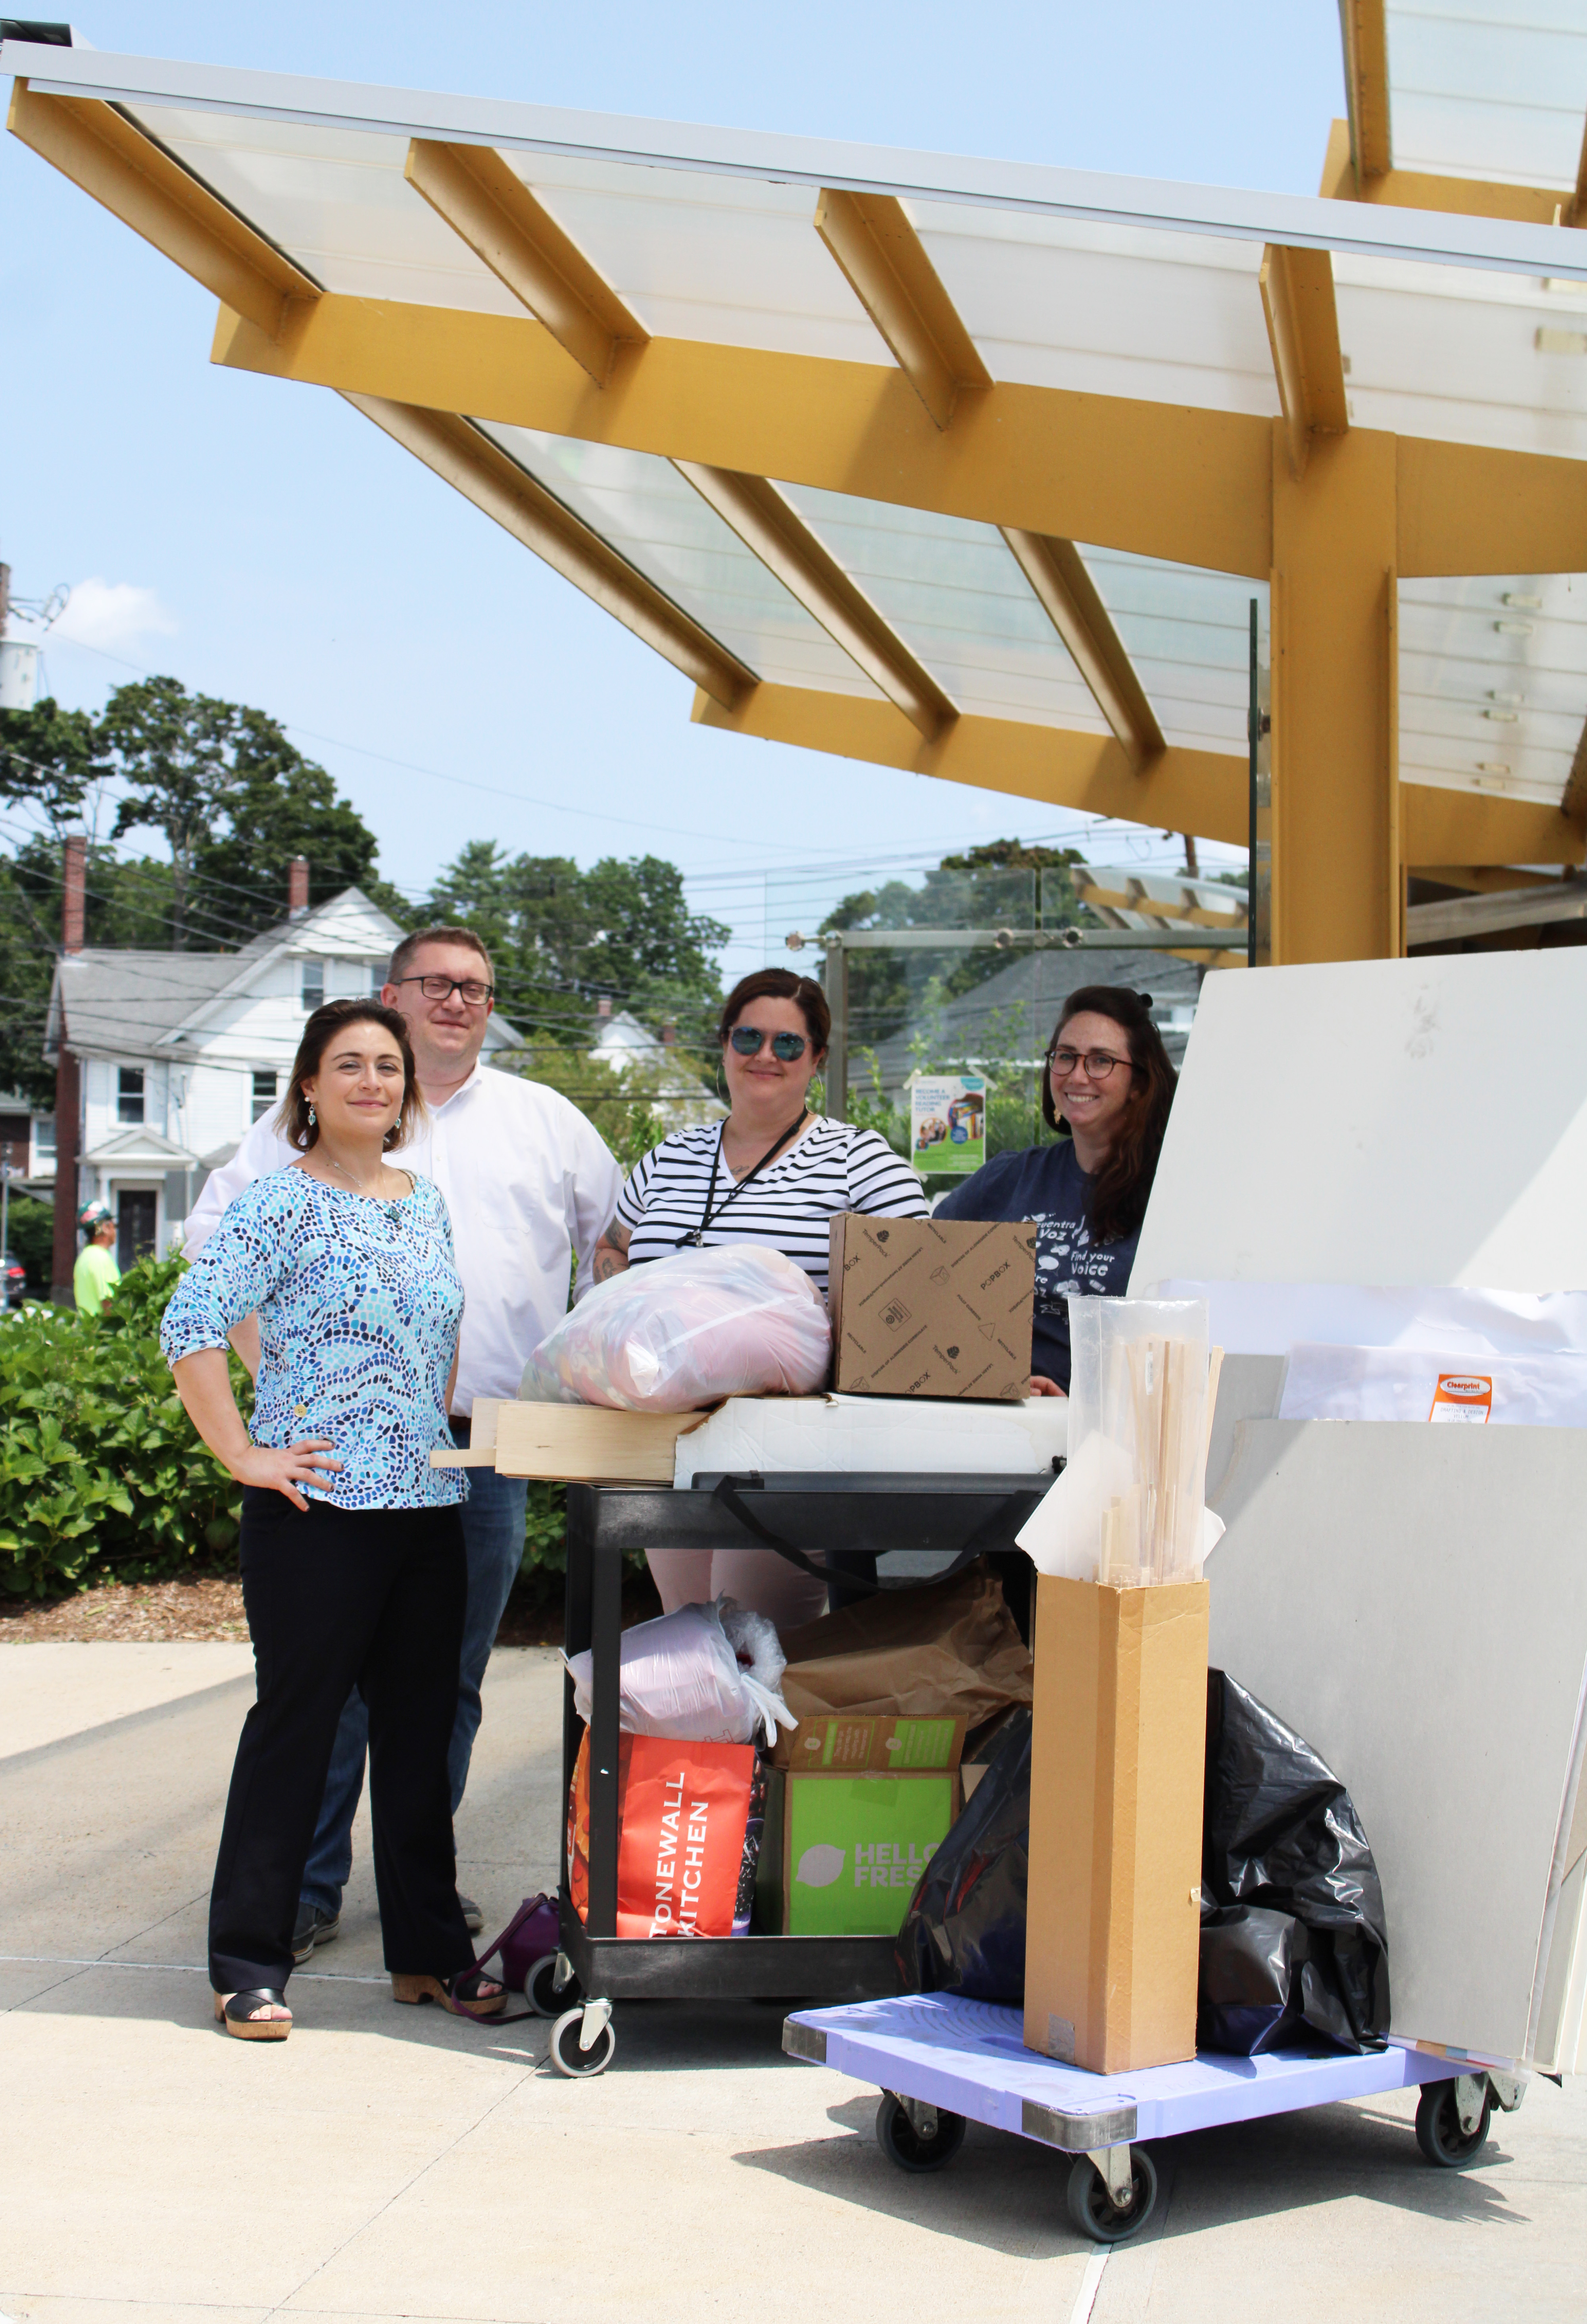 Photo from left to right: Diana Cioffari-MacPhee (MCA Marketing Coordinator), John Matz (MCA Managing Principal), Dawn Dellasanta (FPL Assistant Director), Kelly Cashman (FPL Children's Services Specialist Makers/Crafts) standing outside the Framingham Public Library with the donated makerspace materials